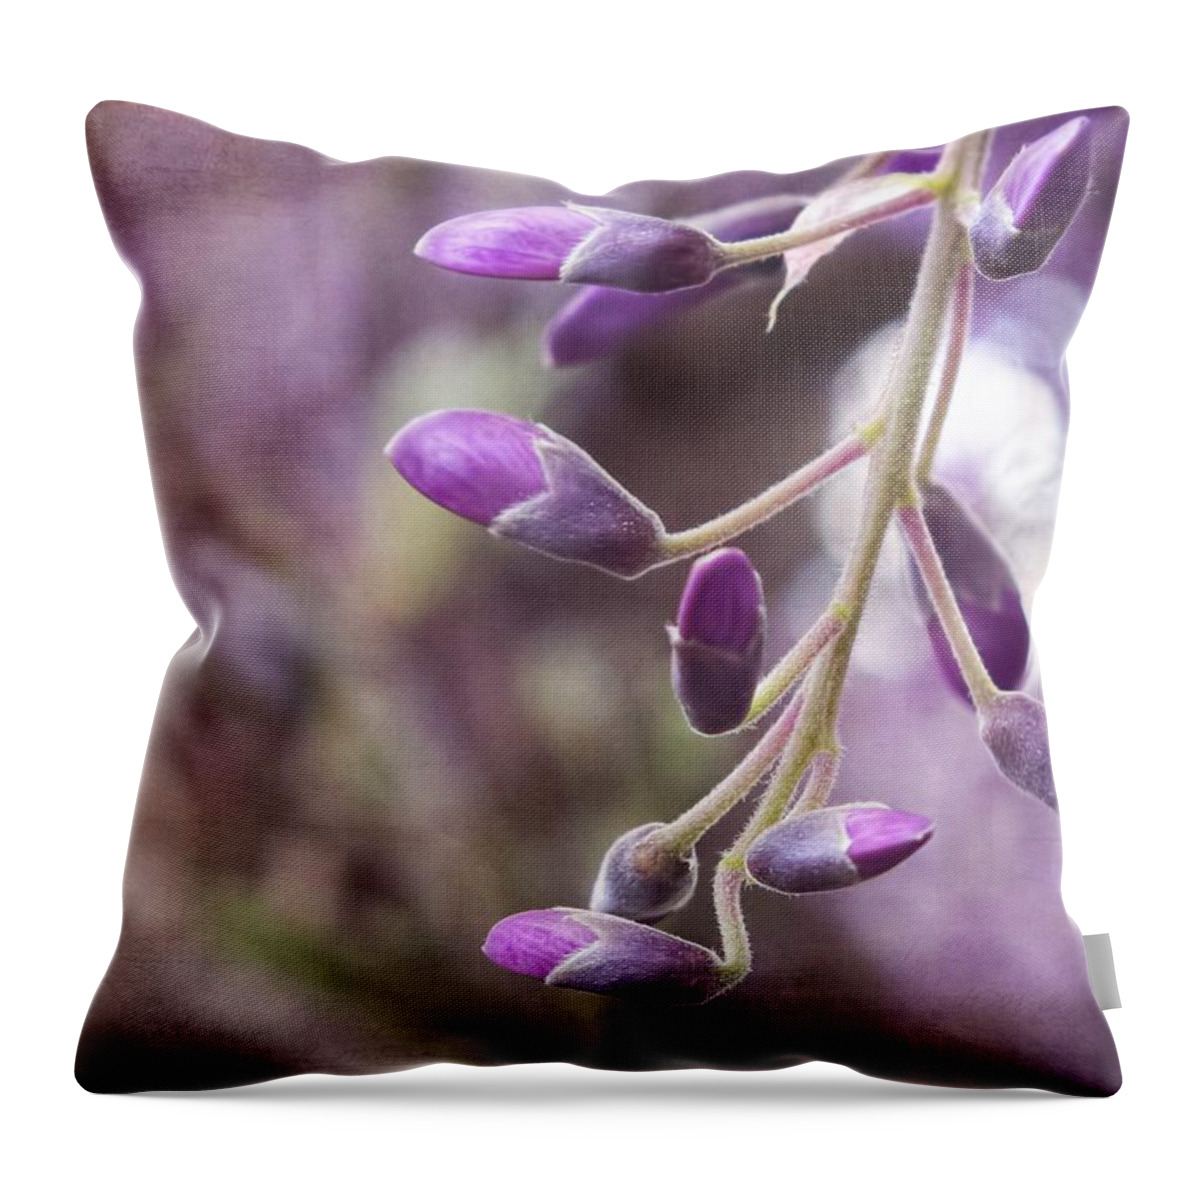 Wisteria Throw Pillow featuring the photograph Wisteria Beginnings by Melissa Bittinger